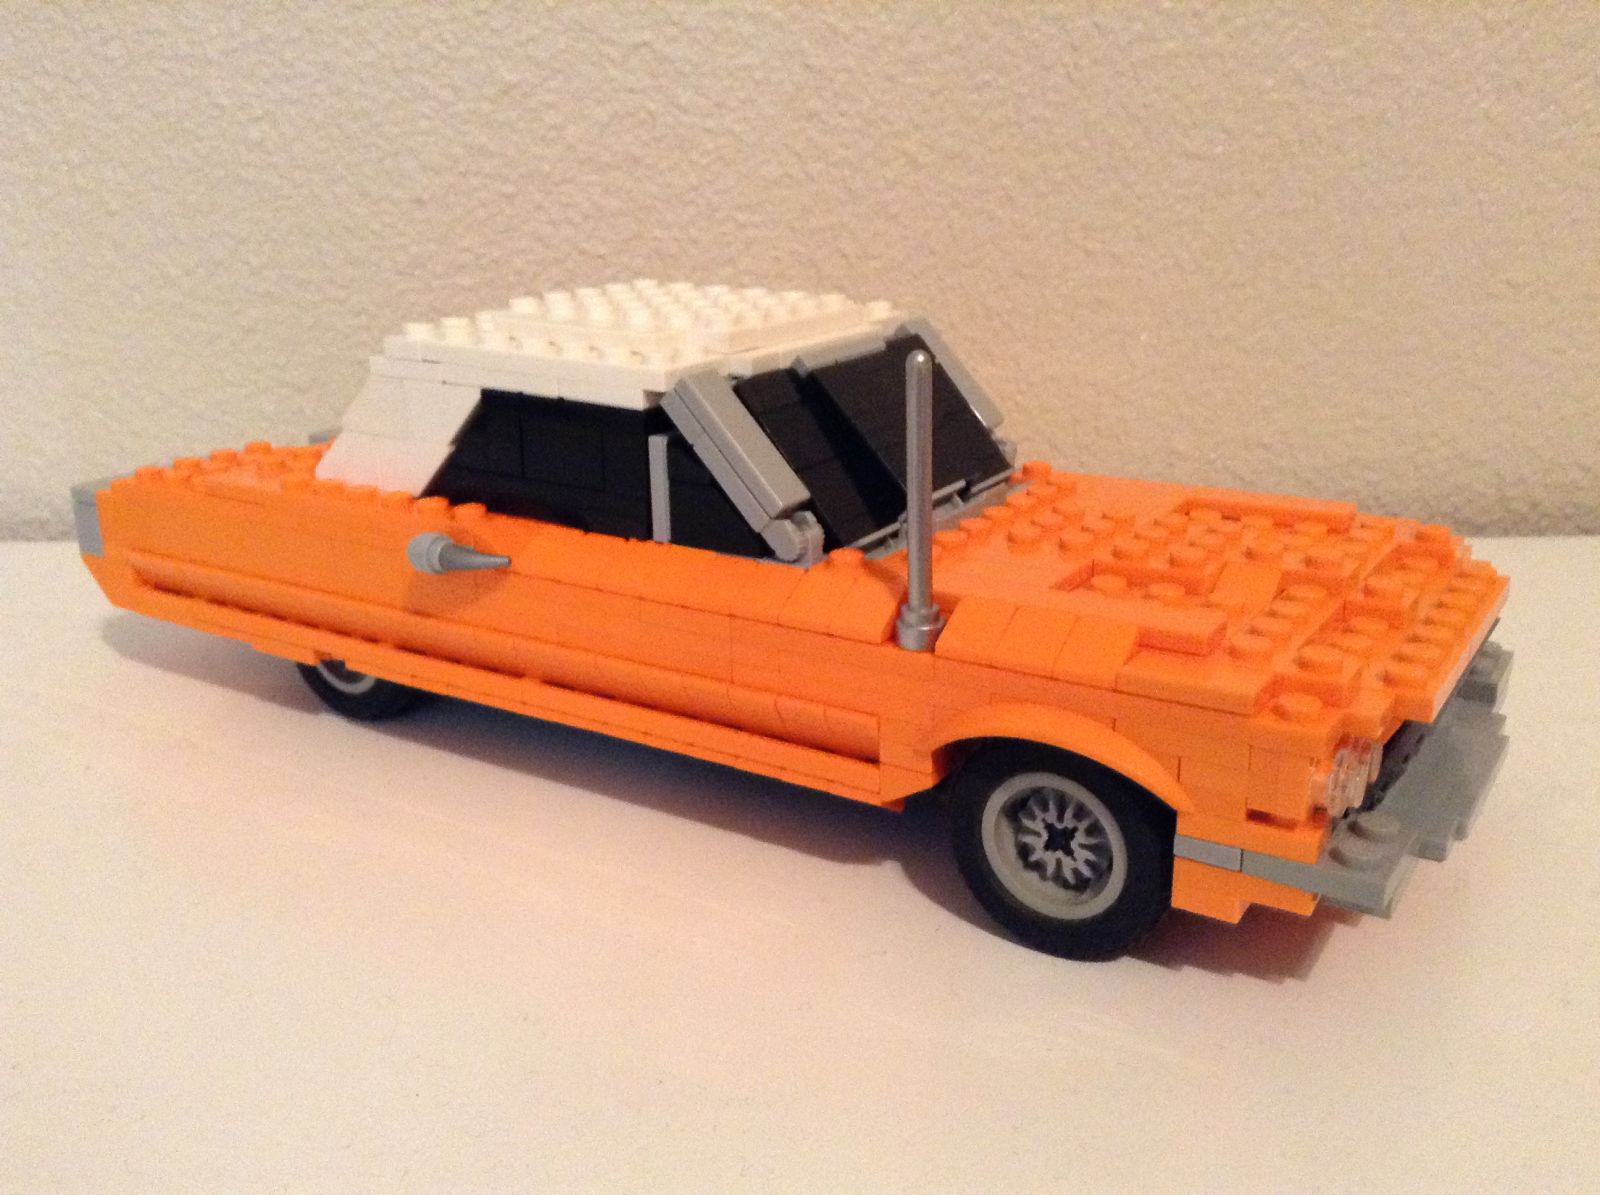 Illustration for article titled Ive recreated my car in Lego.